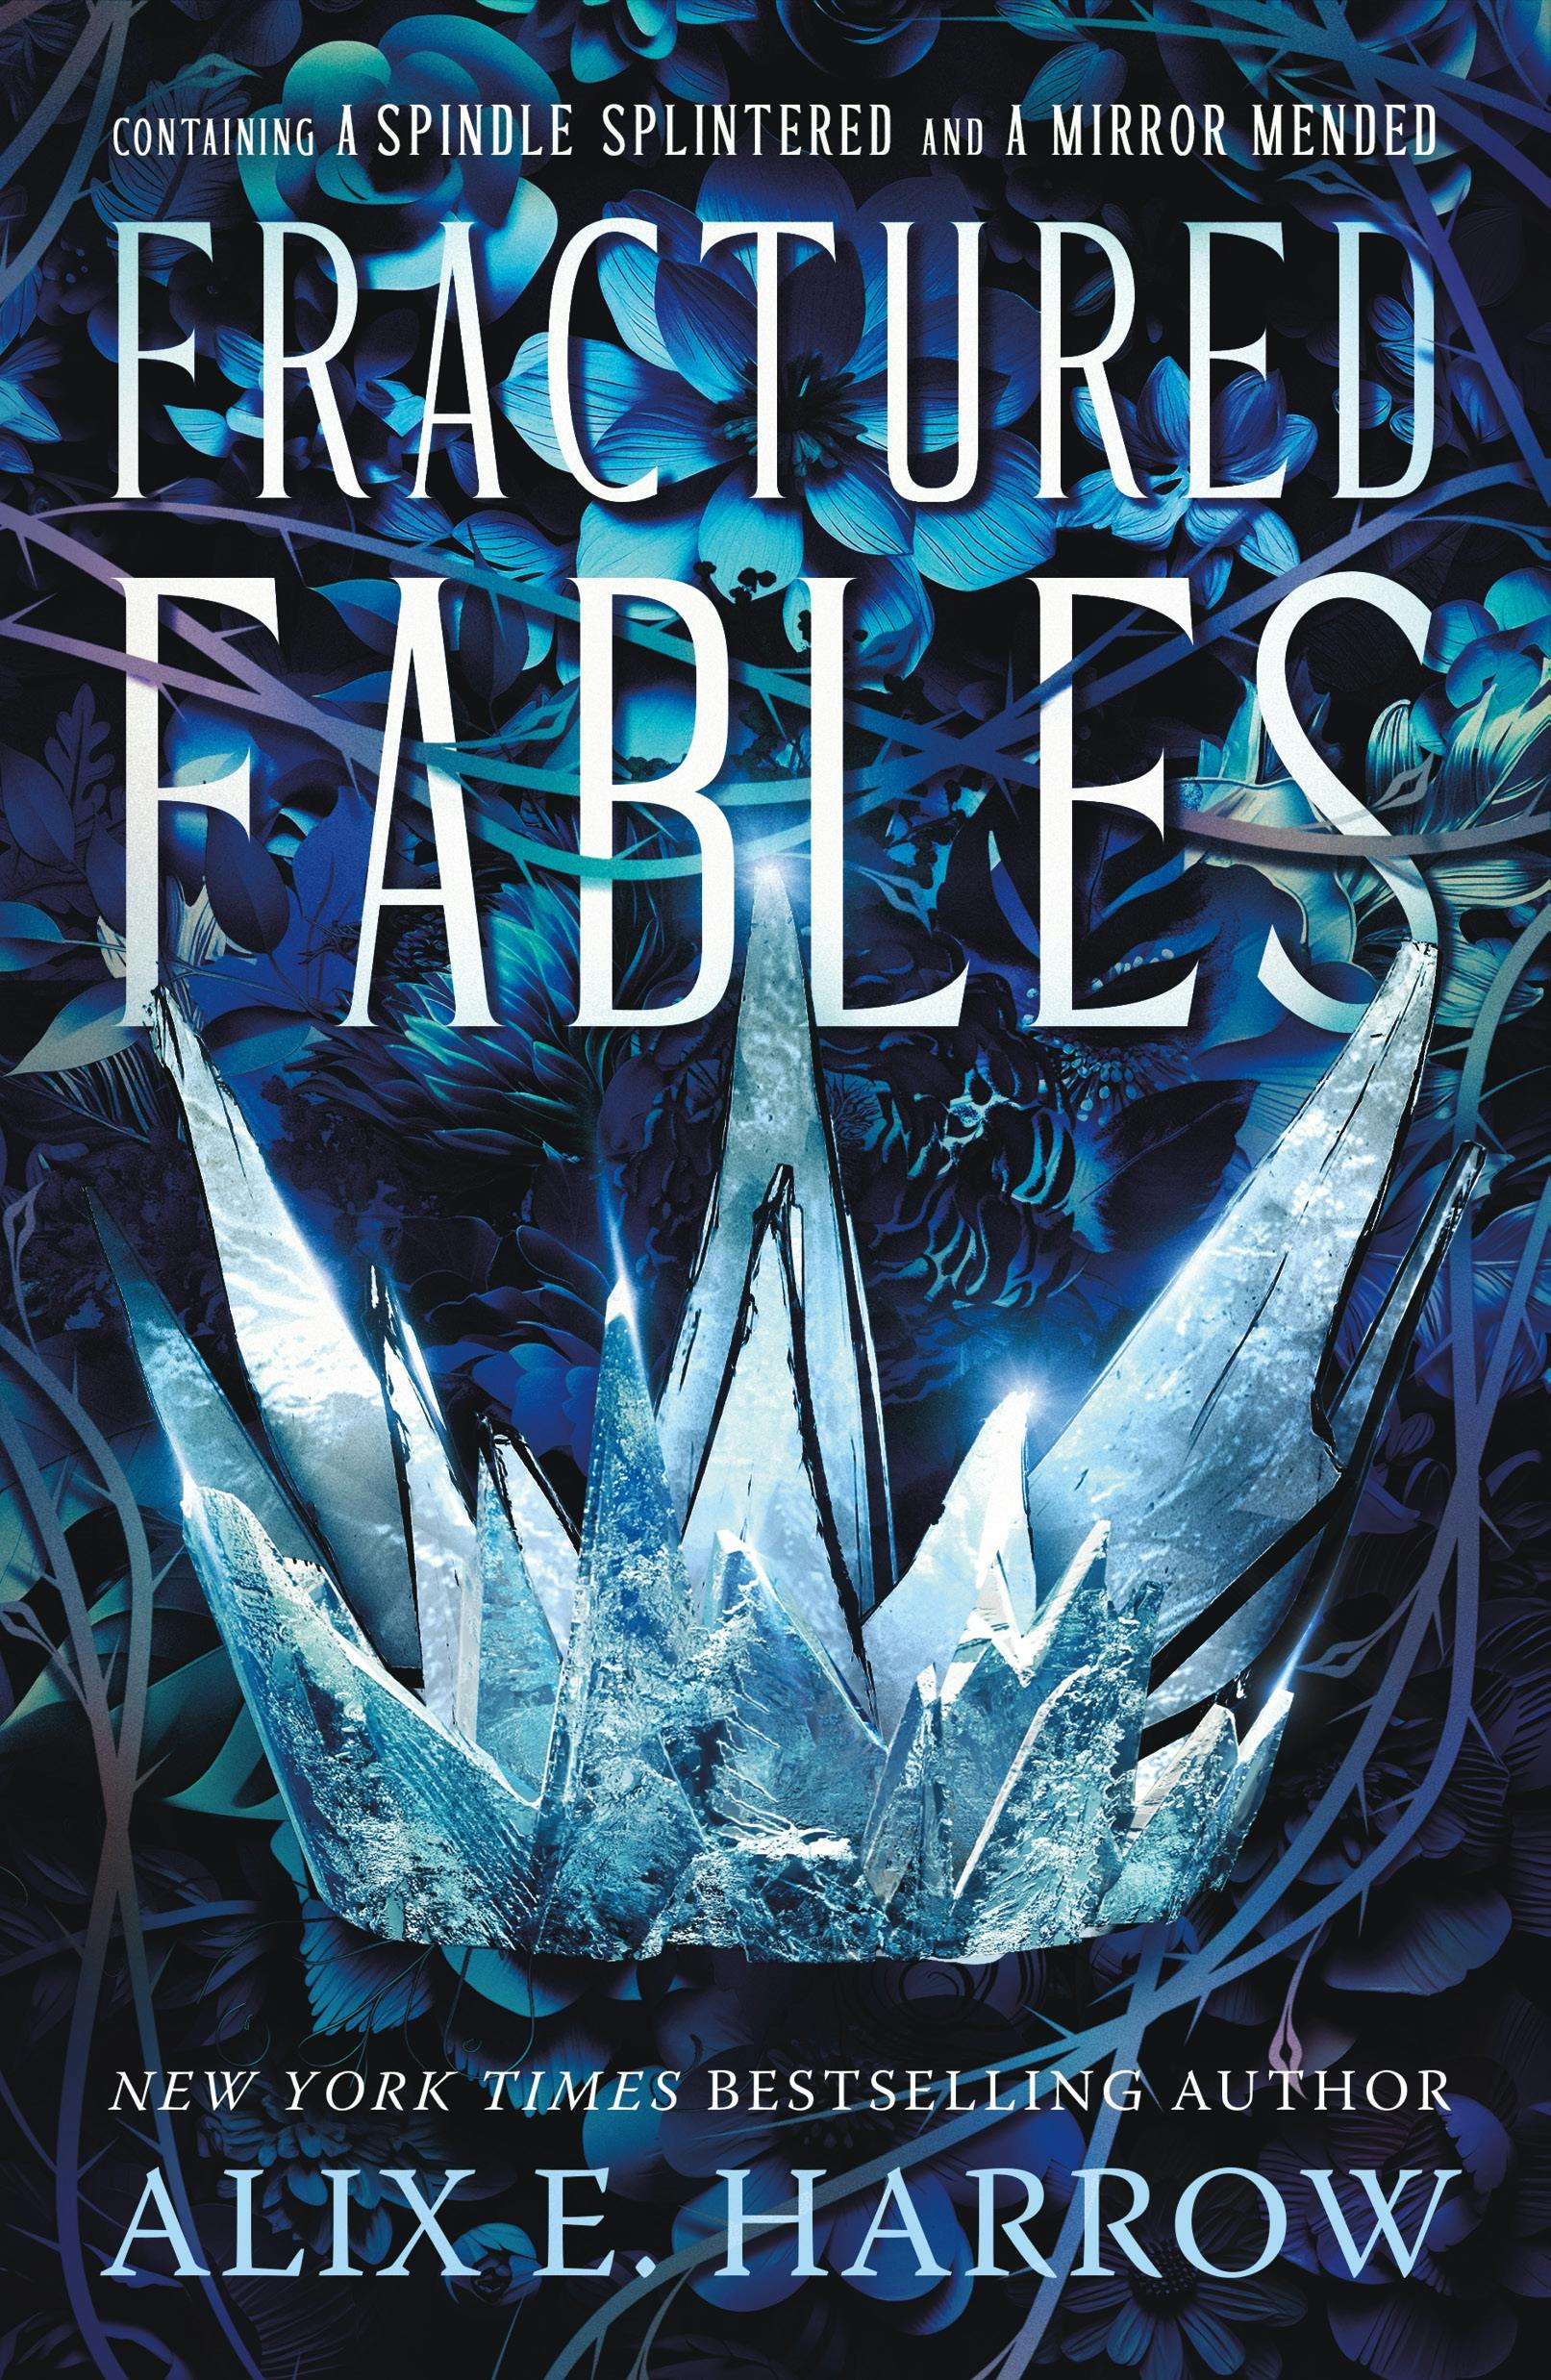 Cover for the book titled as: Fractured Fables